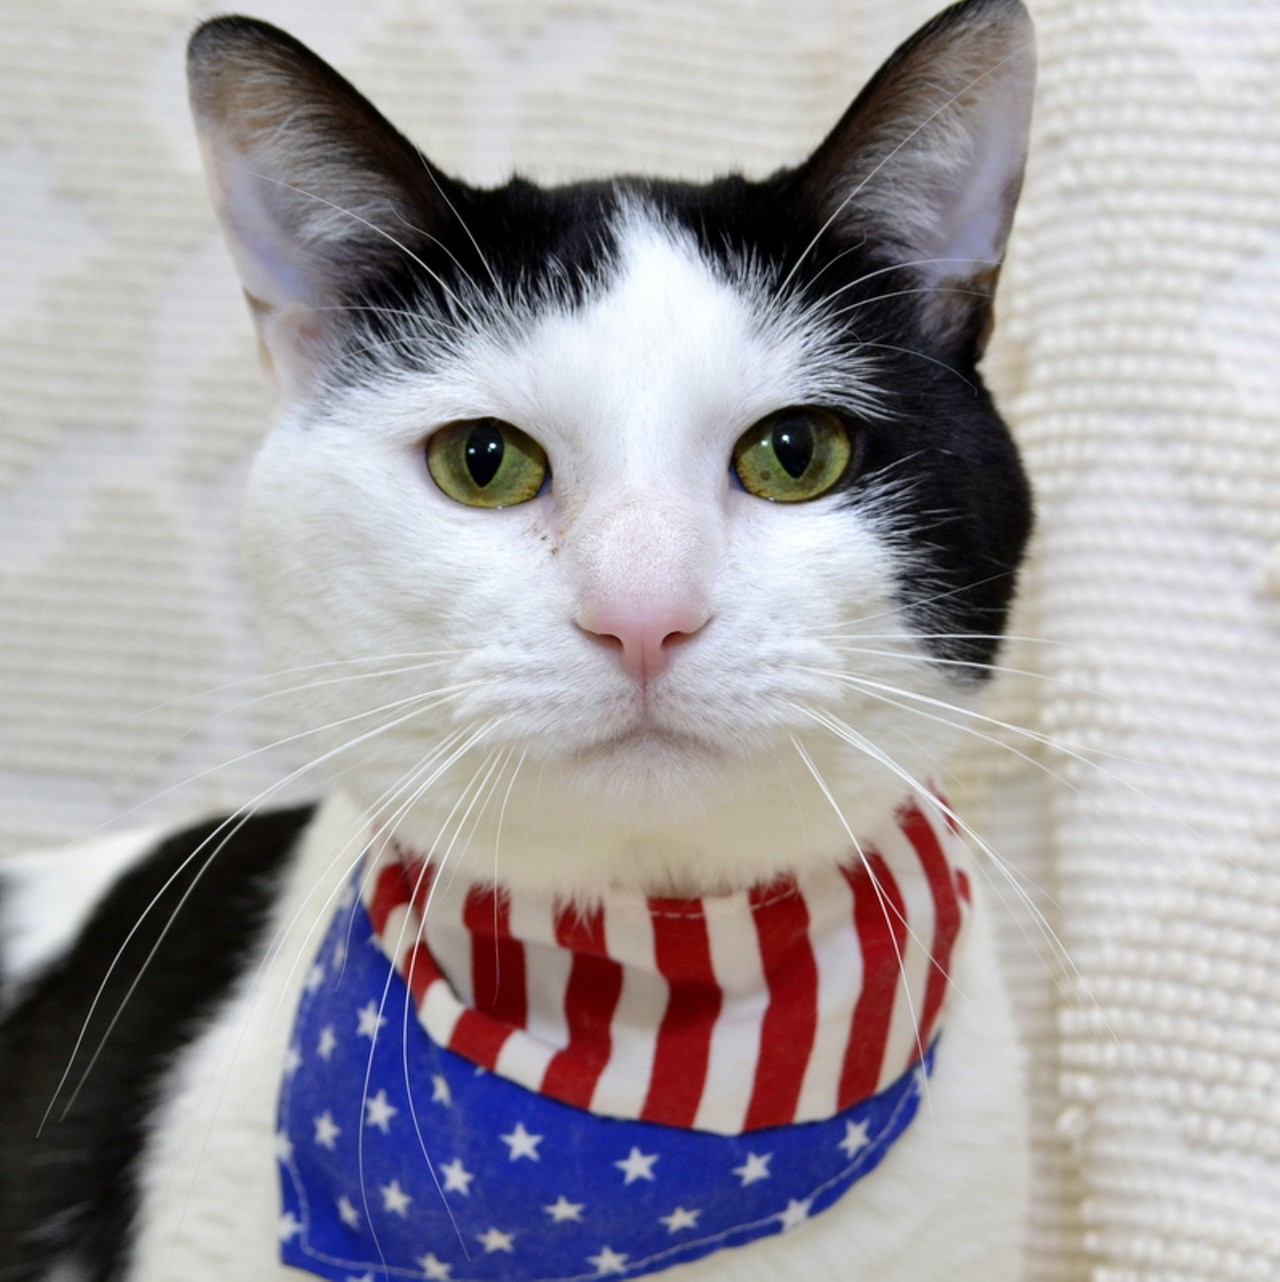 NAME: Tom Petty
GENDER: Male
BREED: Domestic Short Hair
AGE: 3 years, 1 month
WEIGHT: 8.5 pounds
SPECIAL CONSIDERATIONS: &#147;Hard-working&#148;, or barn cat
REASON I CAME TO MHS: Owner surrender
LOCATION: Berman Center for Animal Care in Westland
ID NUMBER: 864063